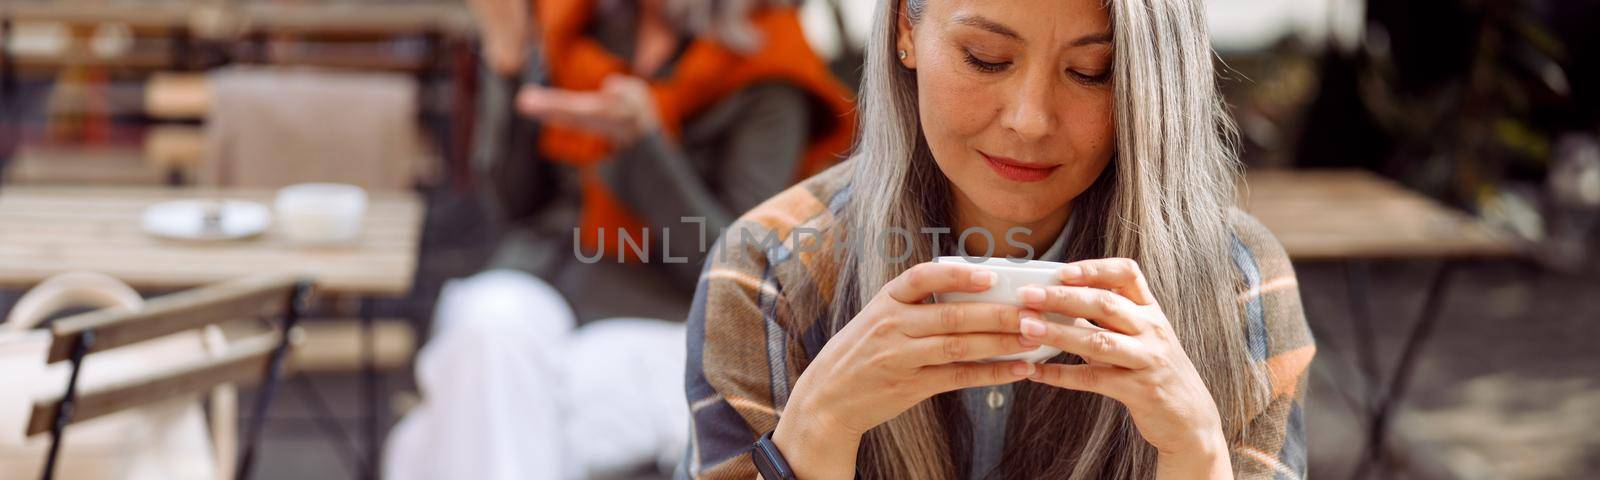 Senior cafe guests, focus on pretty silver haired lady holding cup of drink at table on outdoors cafe terrace on autumn day